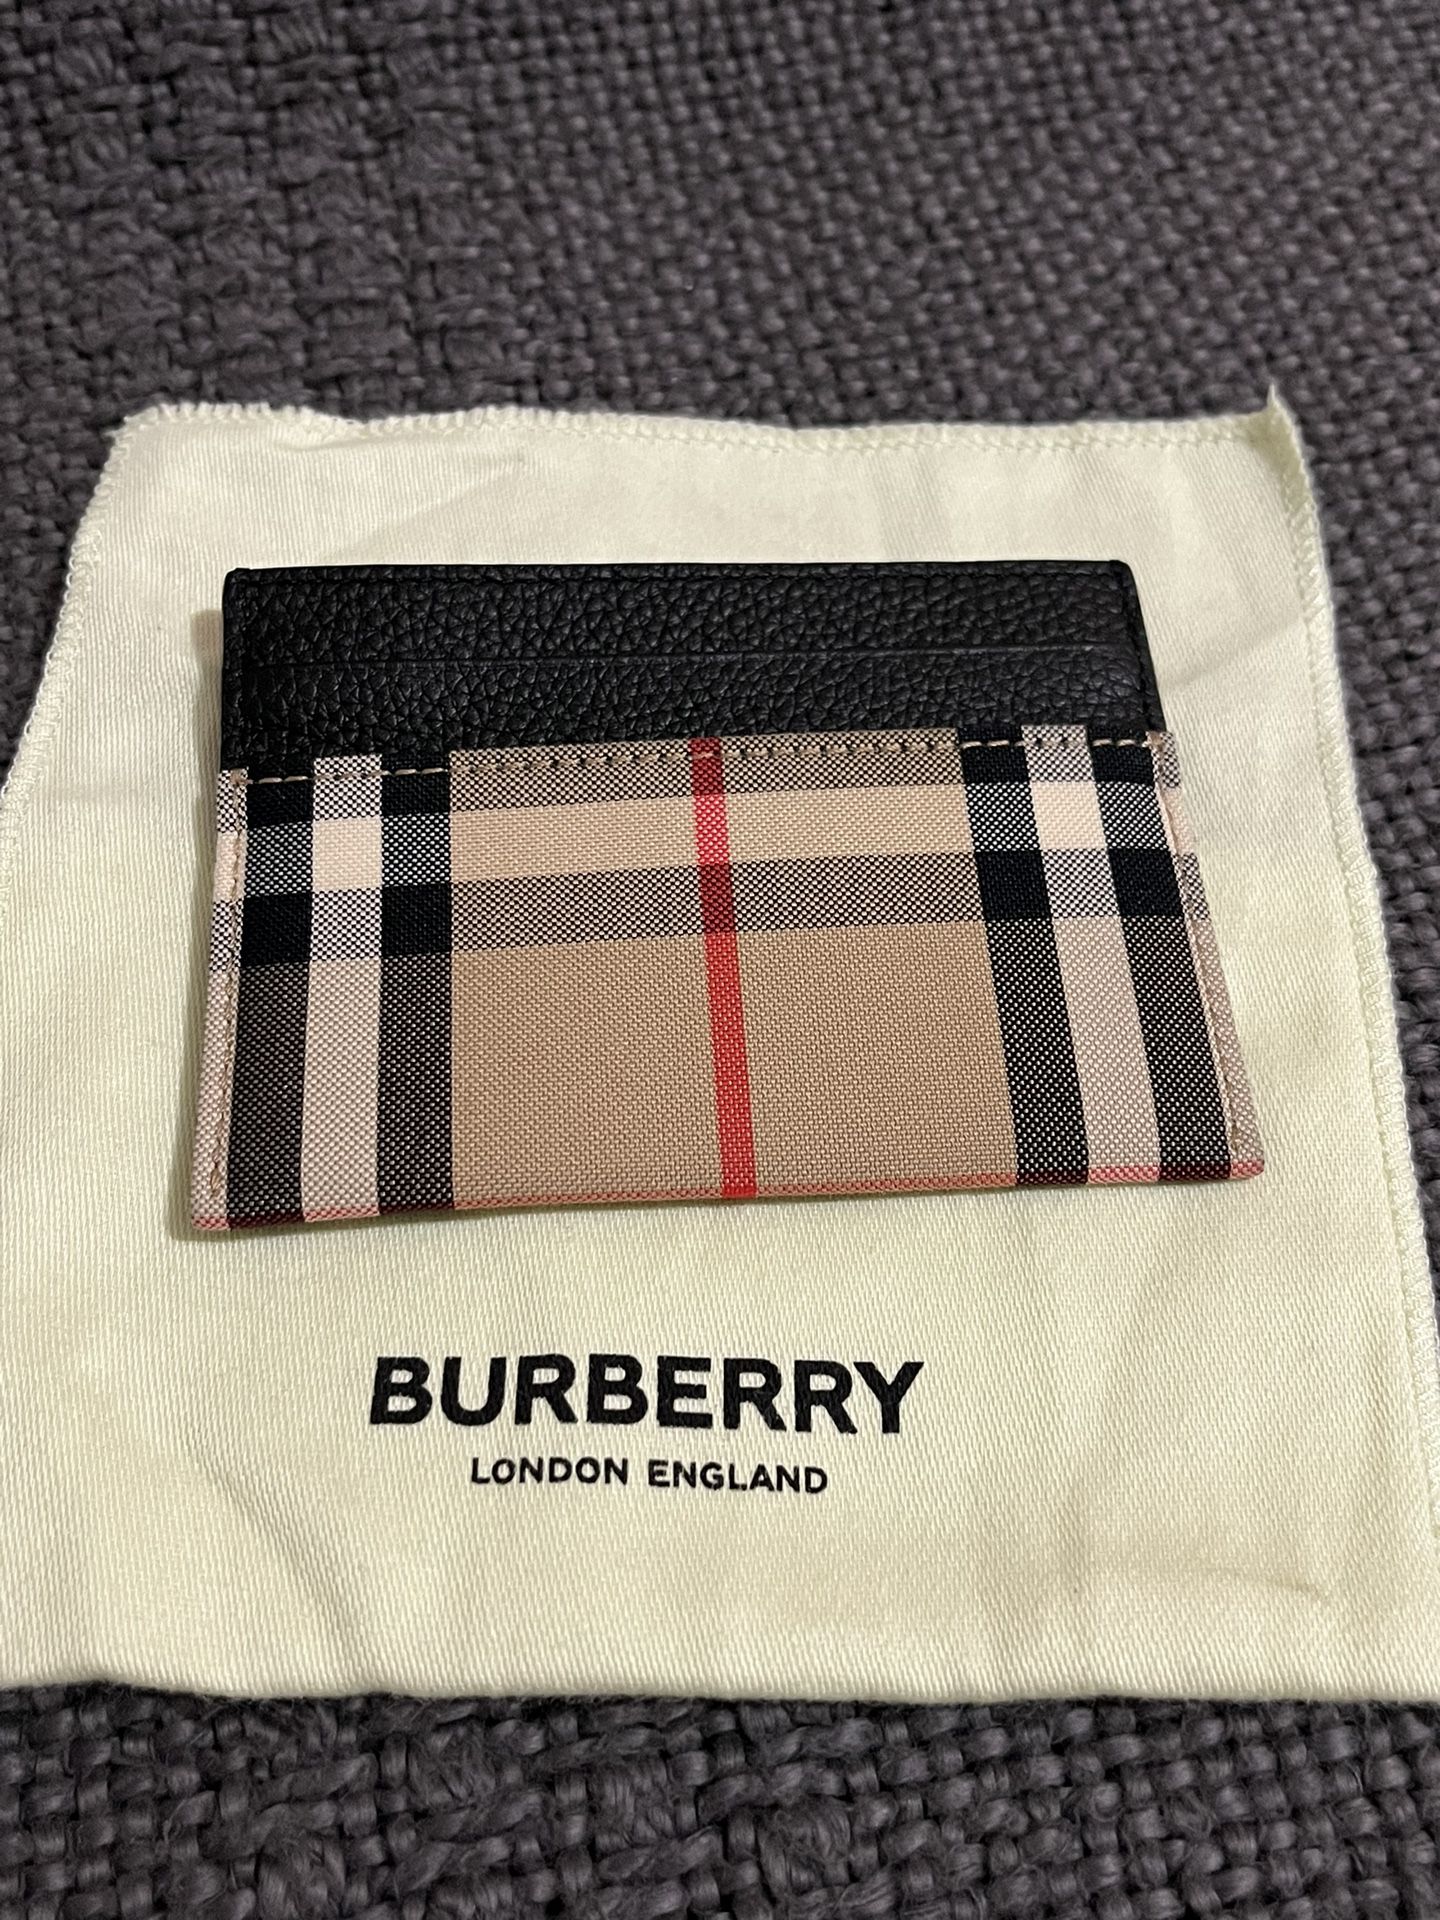 Burberry Card Holder Wallet New no tags 